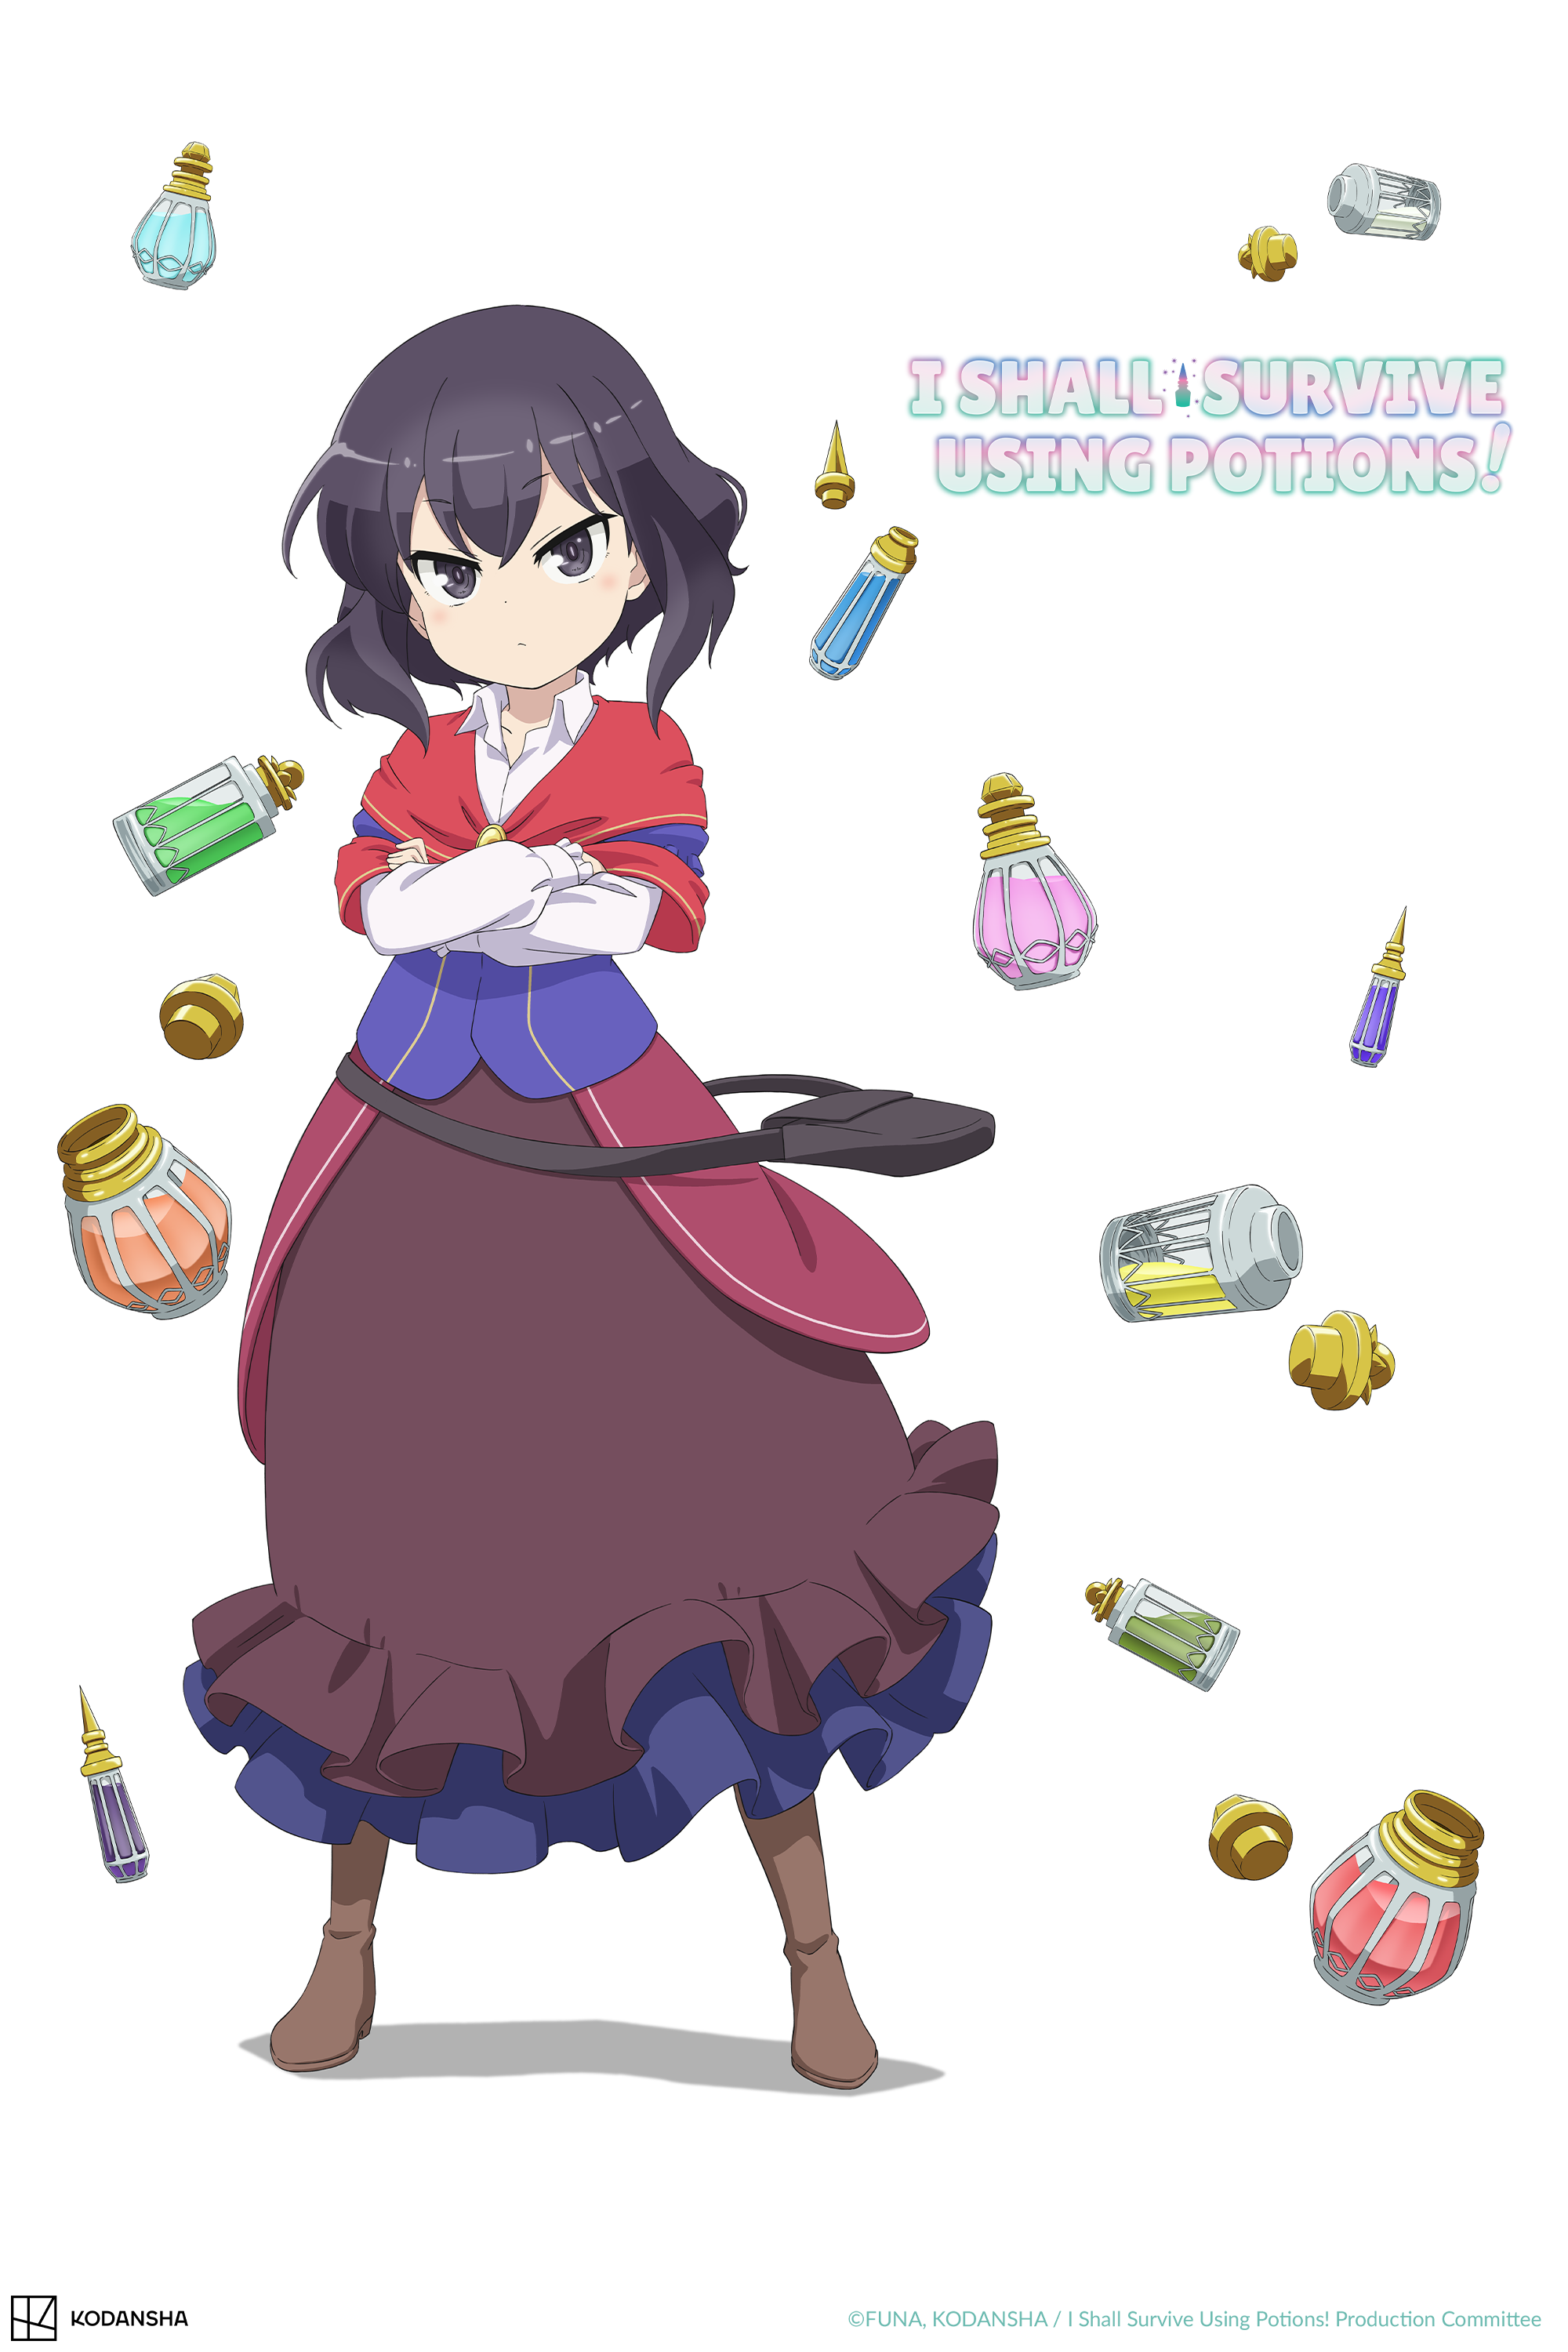 Art Credit: I Shall Survive Using Potions! – ©FUNA, KODANSHA - I Shall Survive Using Potions! Production Committee